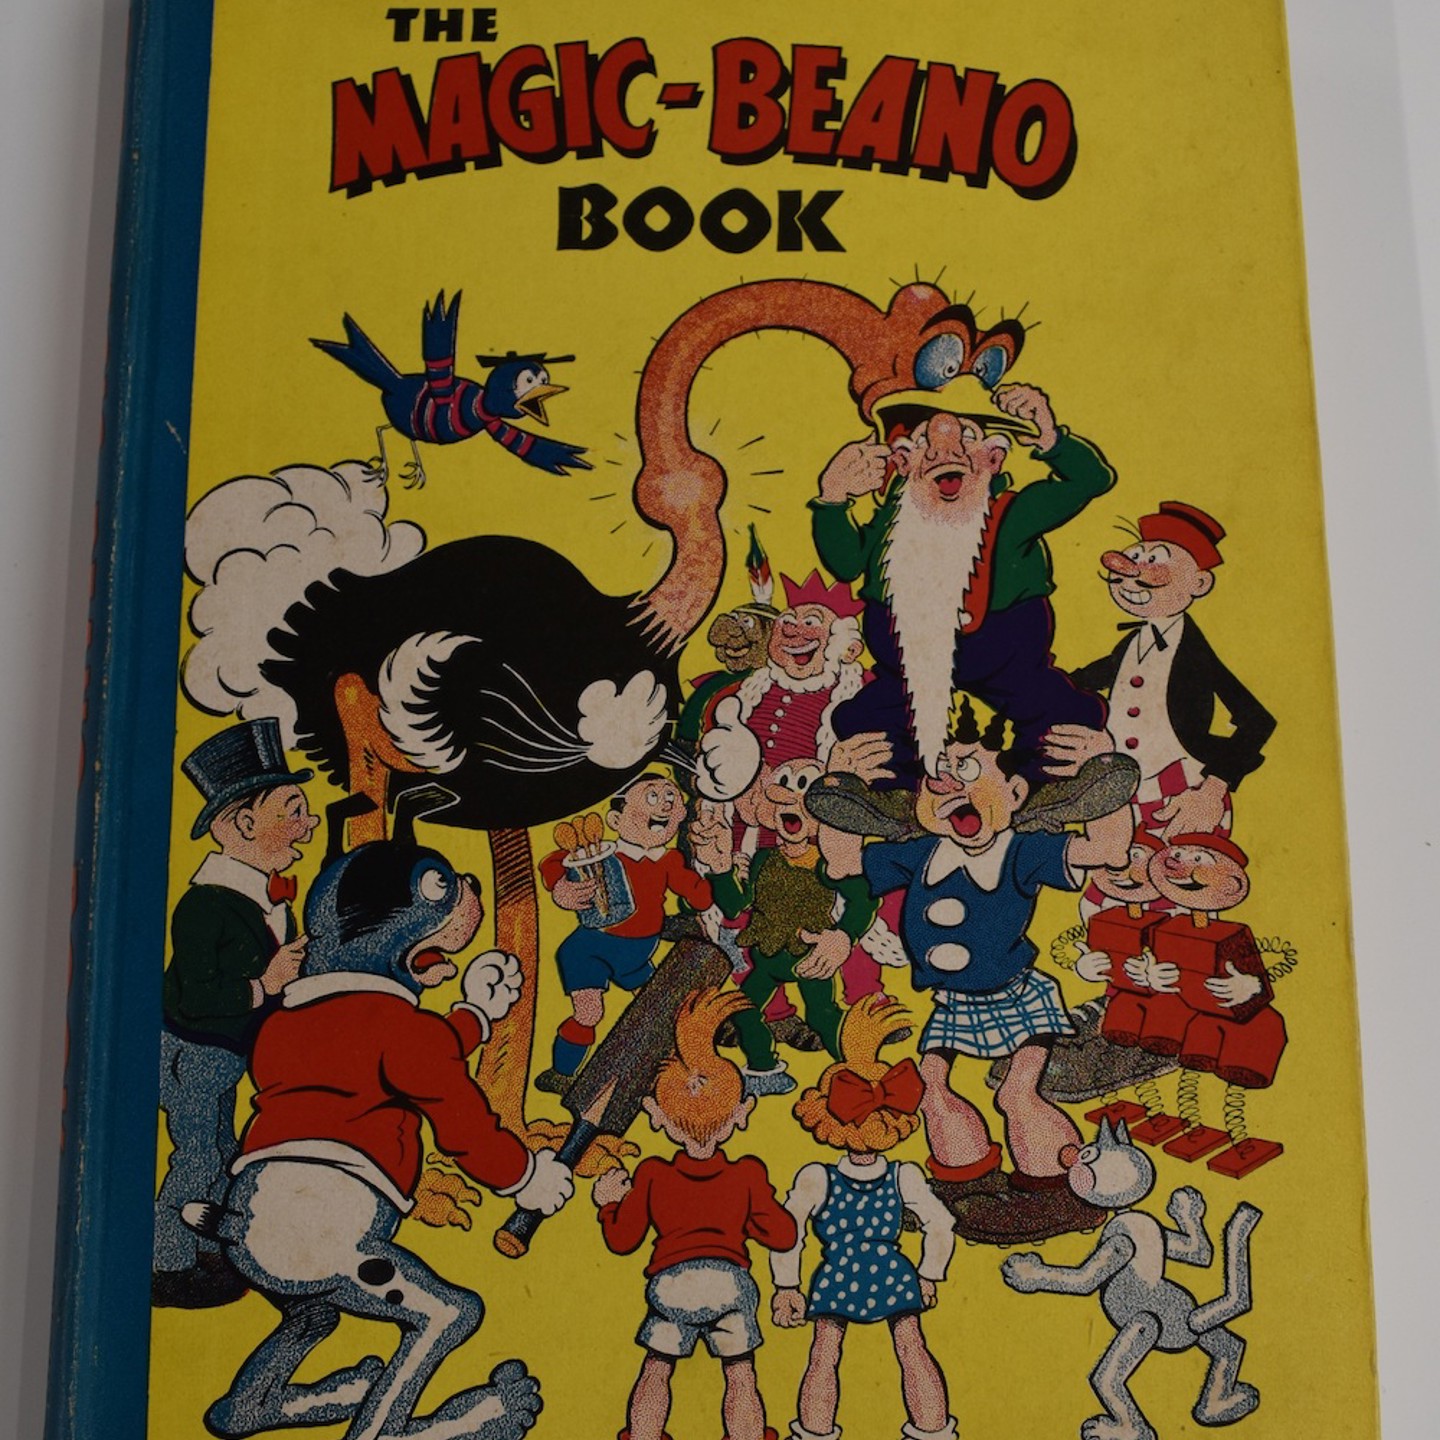 The Magic Beano Book (1947) First Edition D.C. Thompson, Big Eggo Cover, Bright Boards With Dedication Page Clear Of Inscription HAMMER Ś480